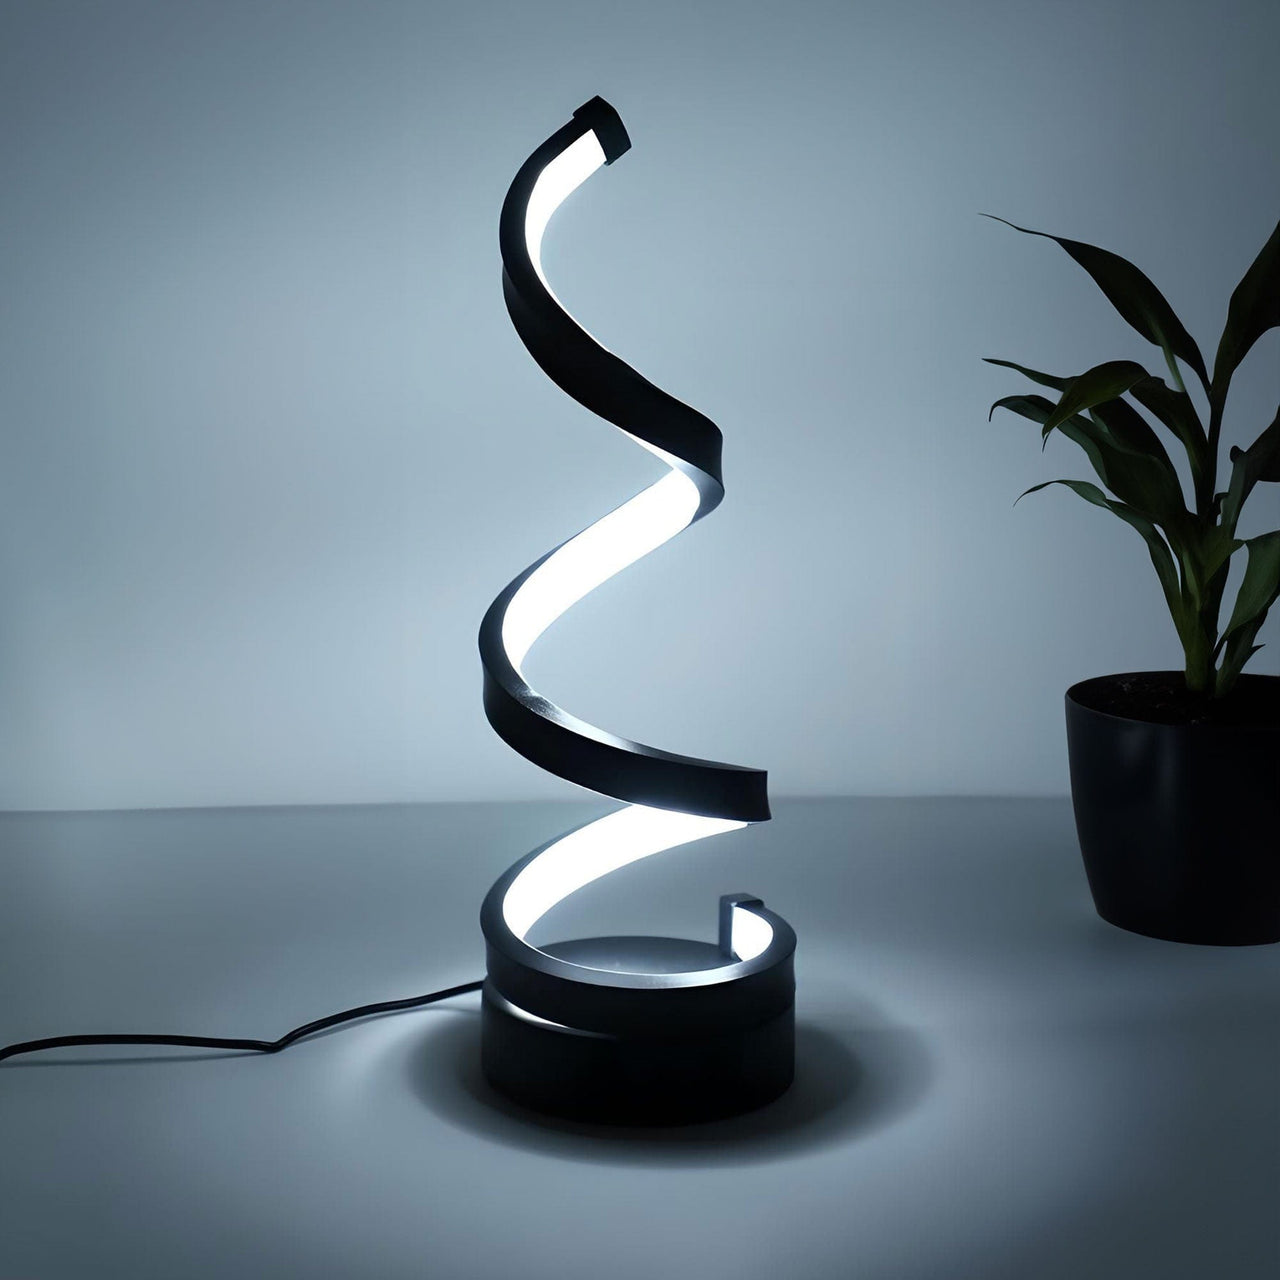 The Spiral Table Lamp